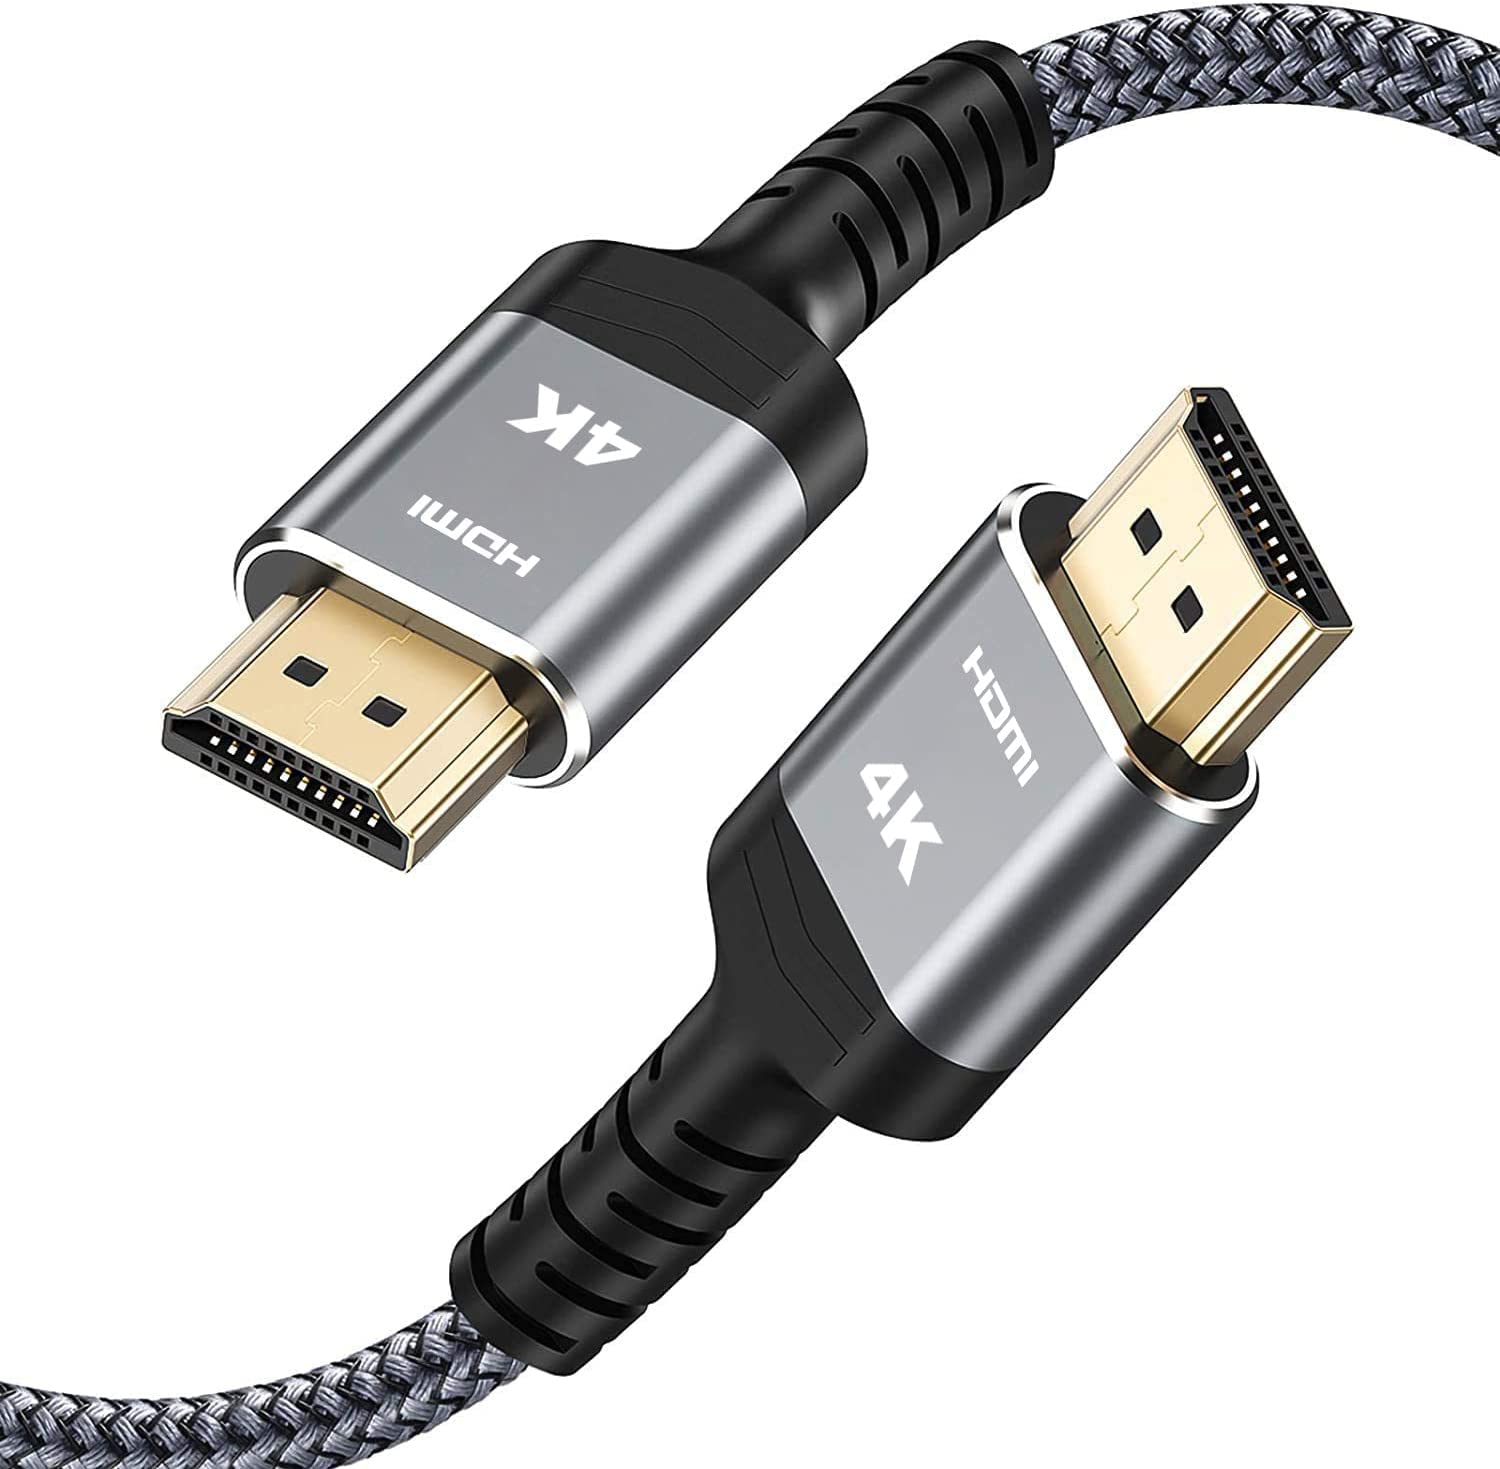 4K HDMI Cable 15FT,Highwings 2.0 High Speed 18Gbps [...]